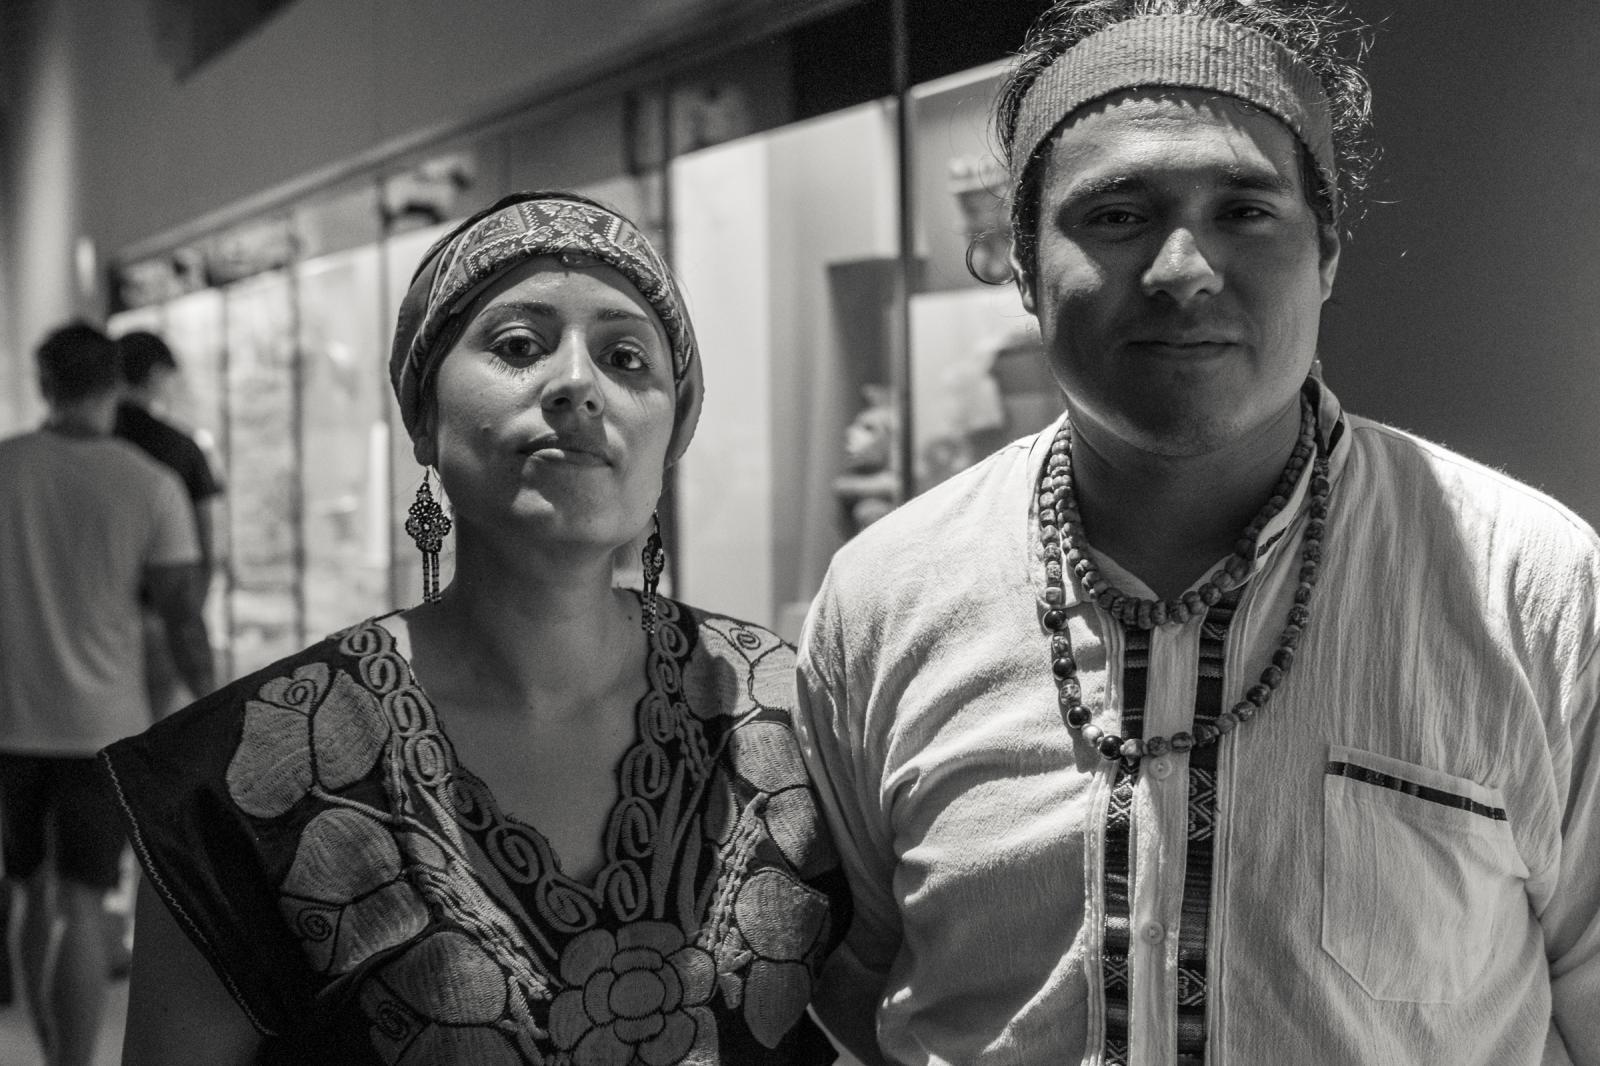 Image from Indigenous People's Day at the American Museum of Natural History - New York City, NY - October 8, 2018. Indigenous Peoples...